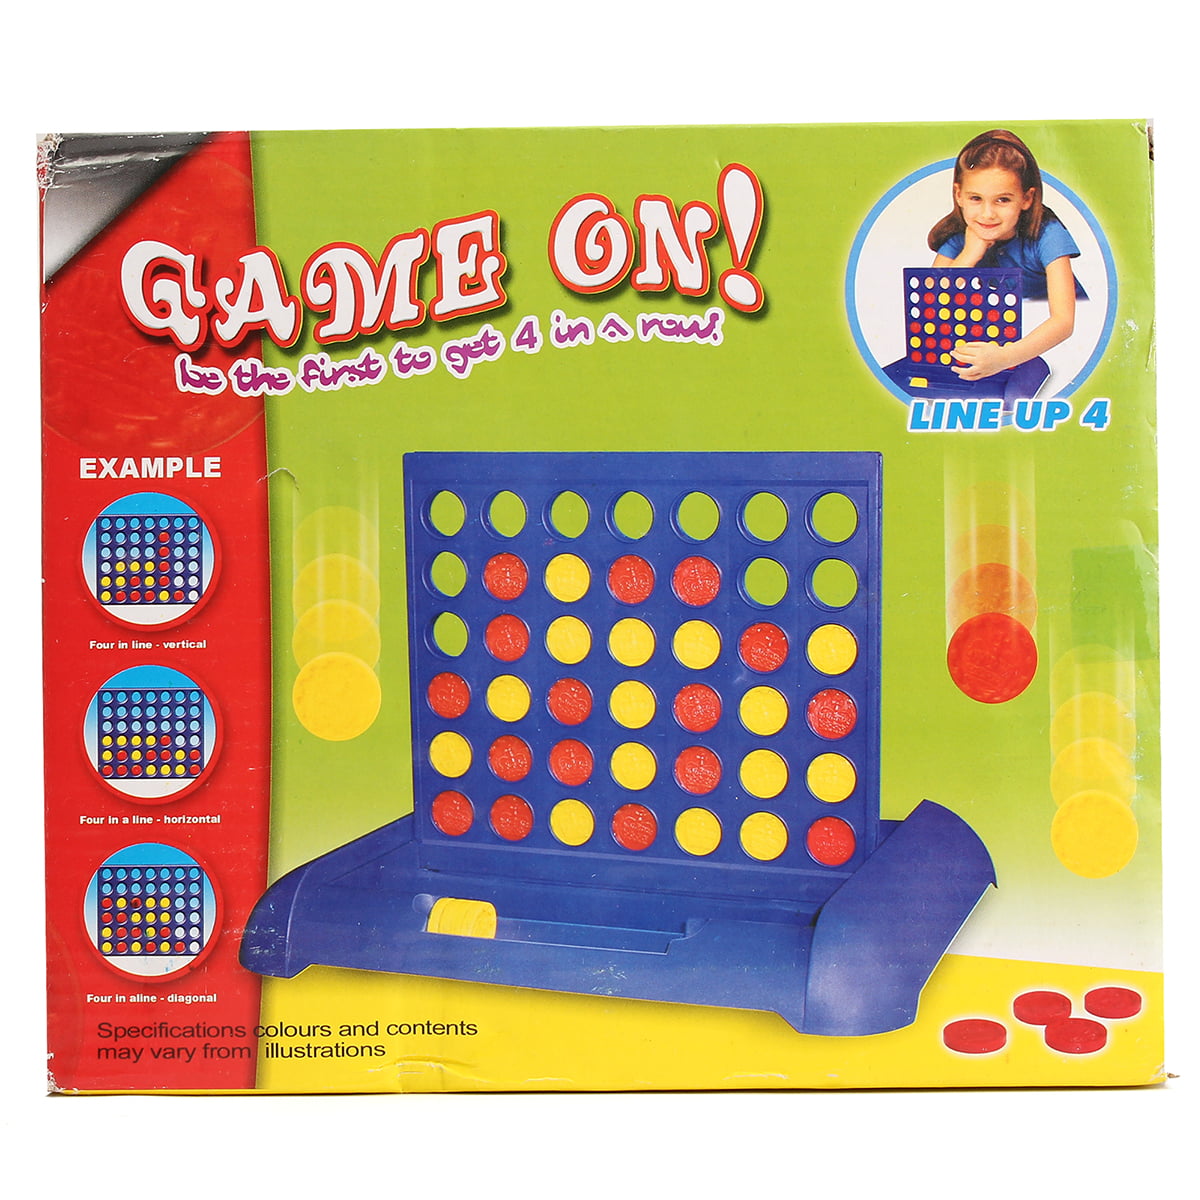 Details about   Large Connect Four In A Row 4 In A Line Board Game Kids Children Educational Toy 